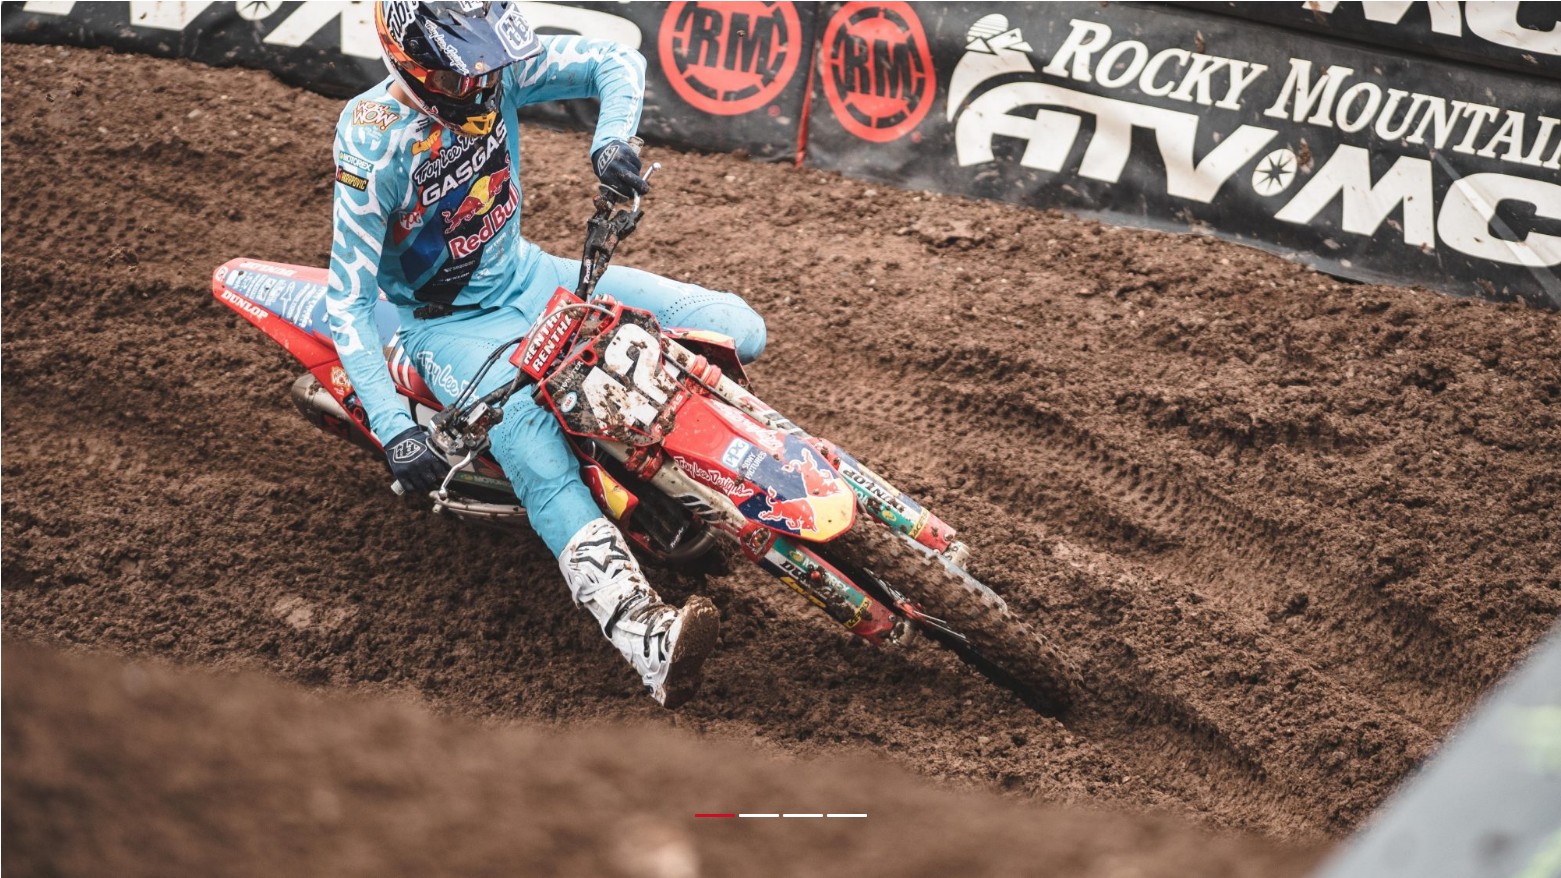 TROY LEE DESIGNS/RED BULL/GASGAS FACTORY RACING TAKE THE POSITIVES